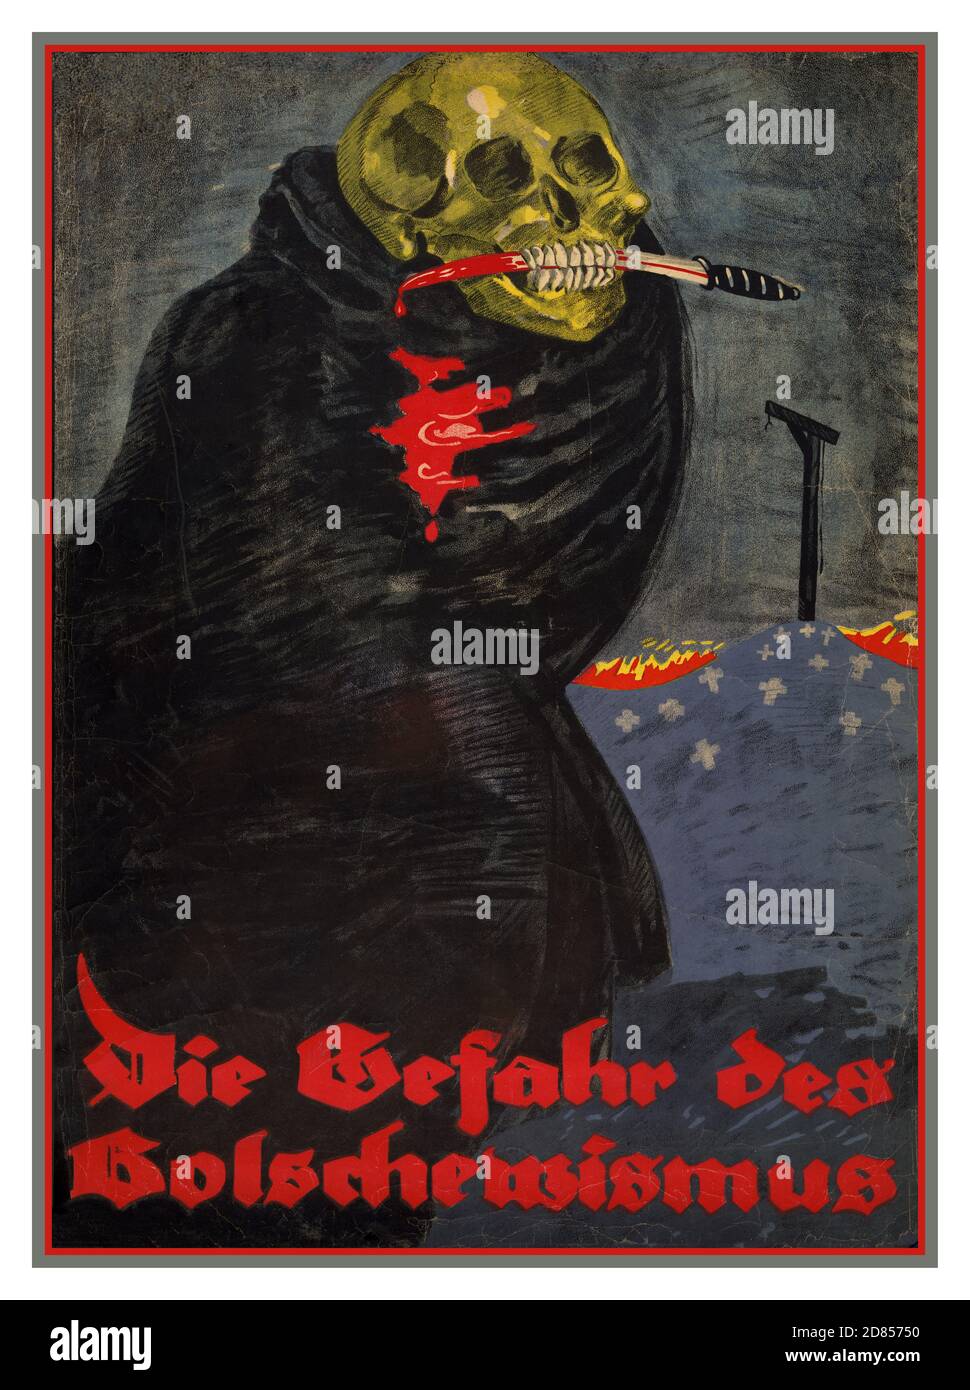 Vintage German World War 1 propaganda poster 'Die Gefahr des Bolschewismus' ' The Danger of Bolshevism' artwork by Rudi Feld artist 1919 (poster)  lithograph color  Poster shows a skeleton, wrapped in a black cloak, with a bloody knife held in its teeth. In the background a hill of crosses on top of which is a gallows. Text reads 'The danger of Bolshevism'. WW1 German propaganda poster First World War Stock Photo